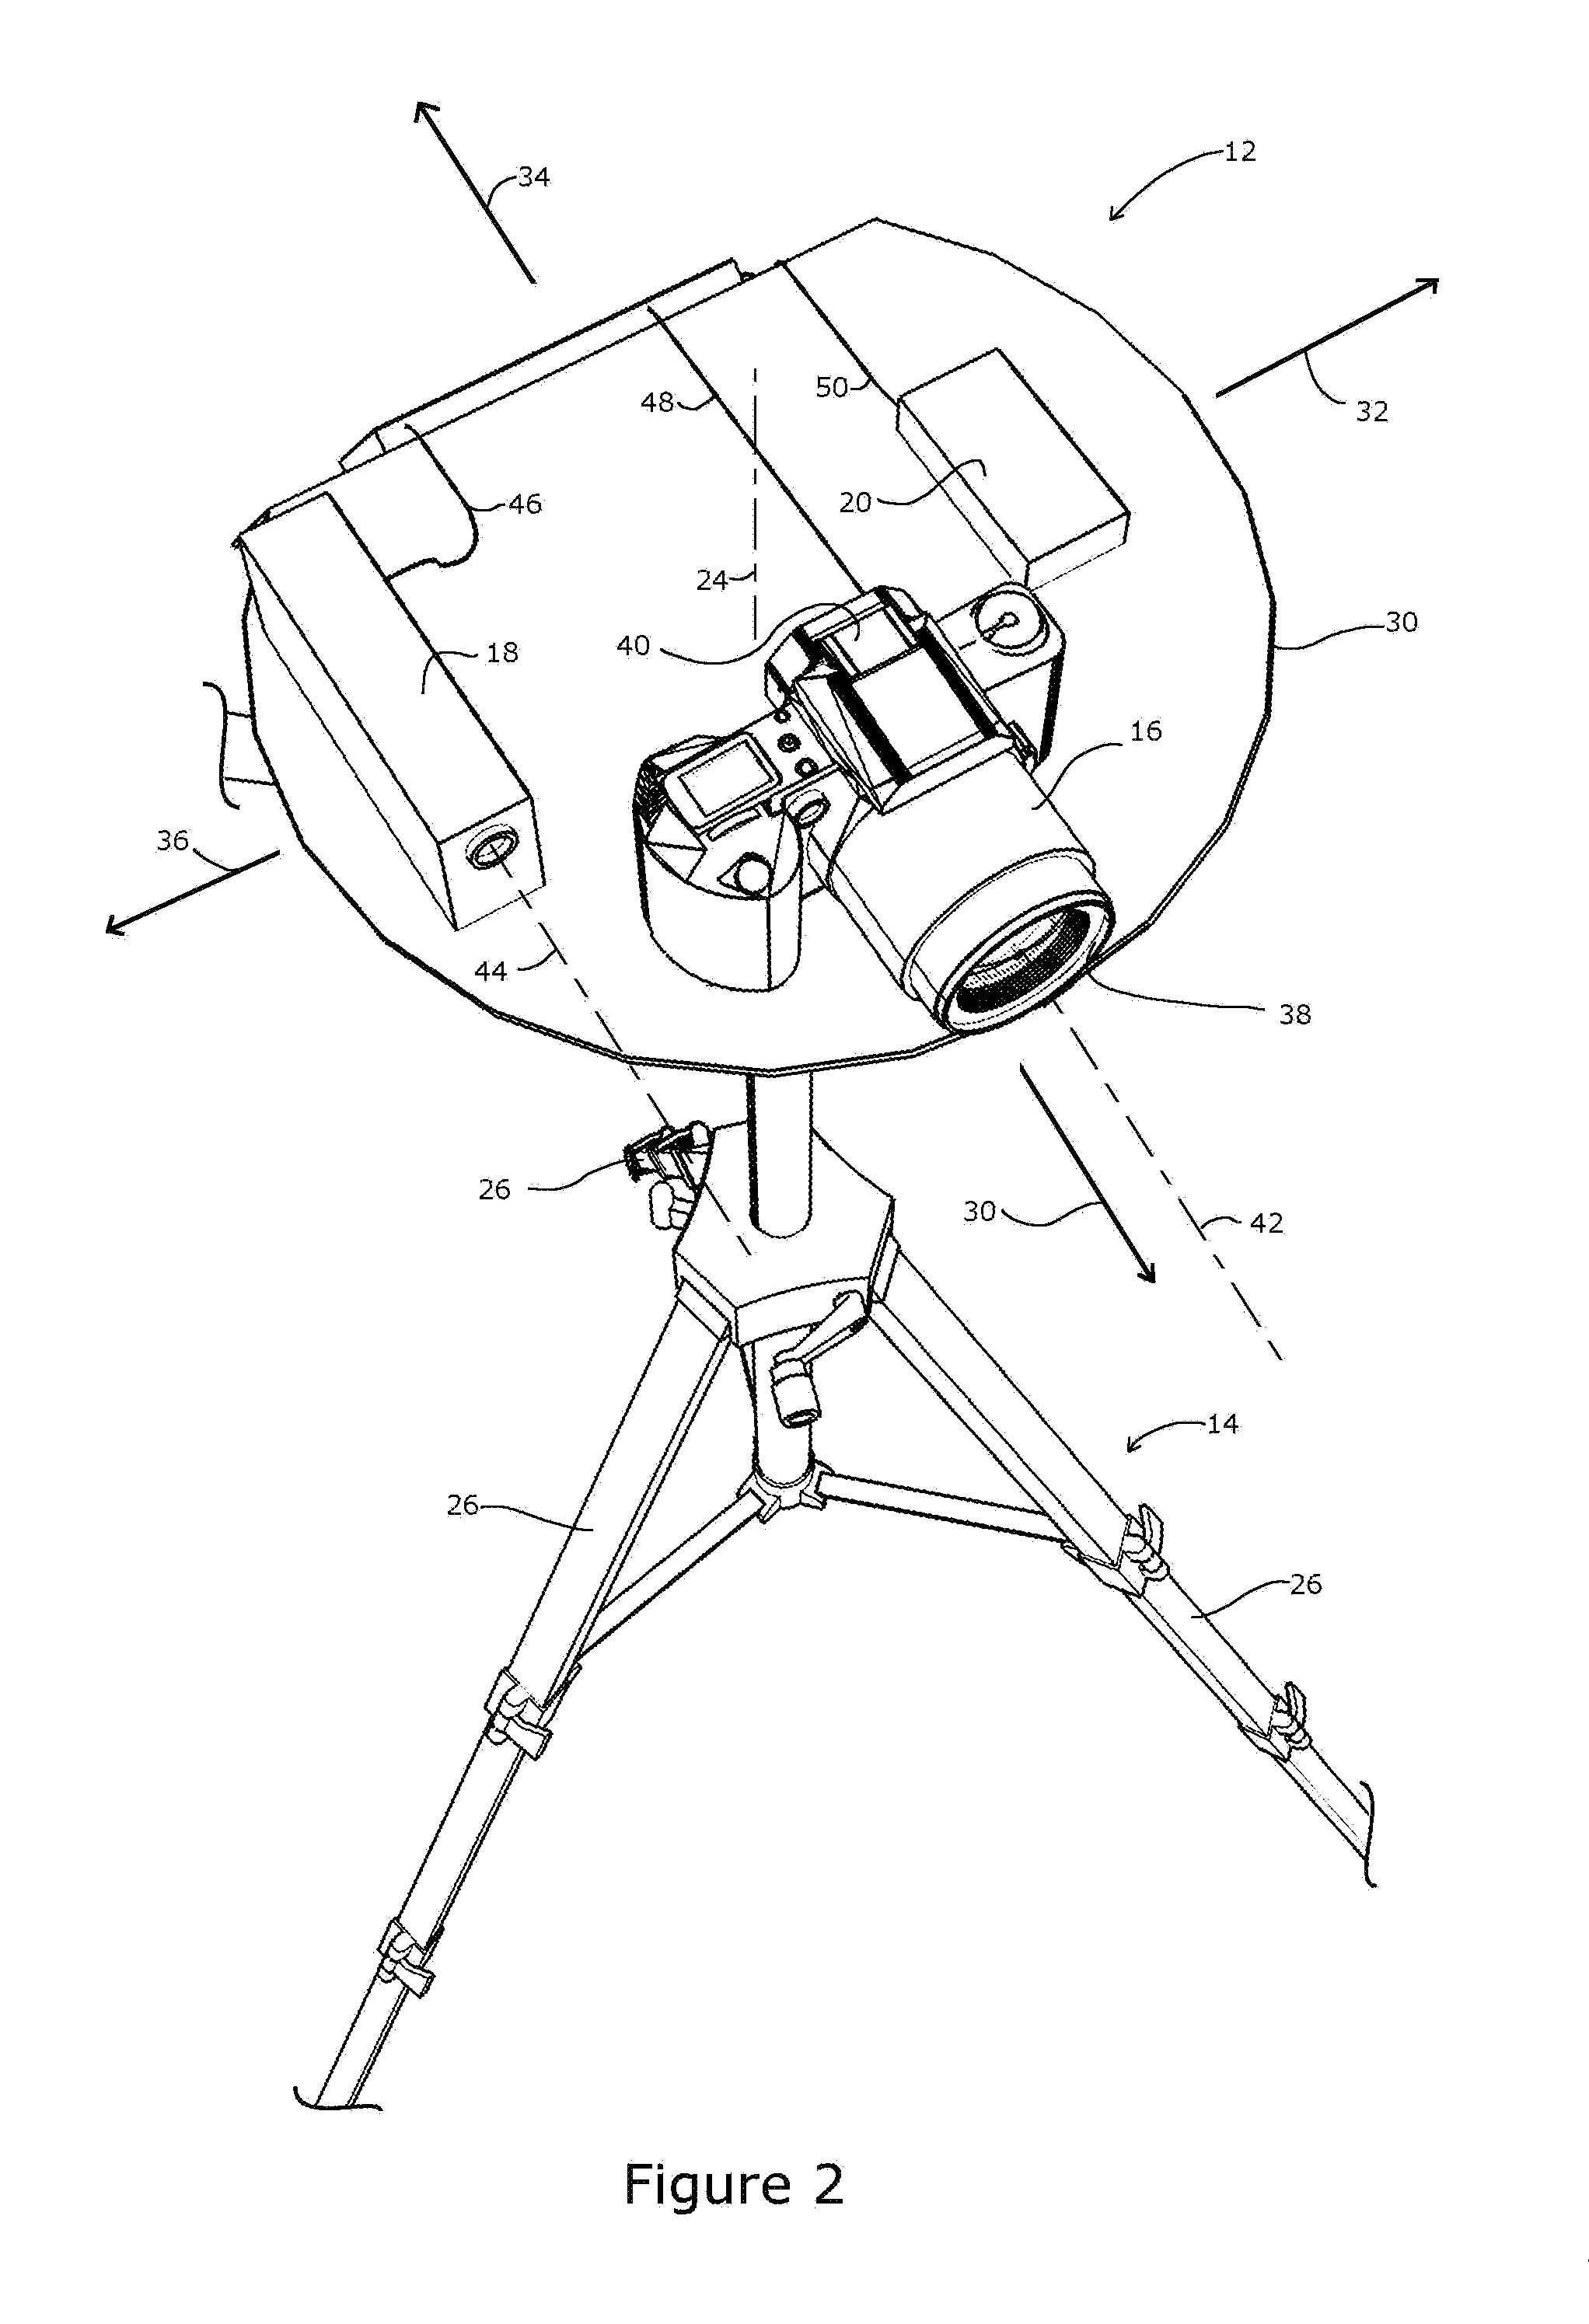 Apparatus and Method for Spatially Referencing Images